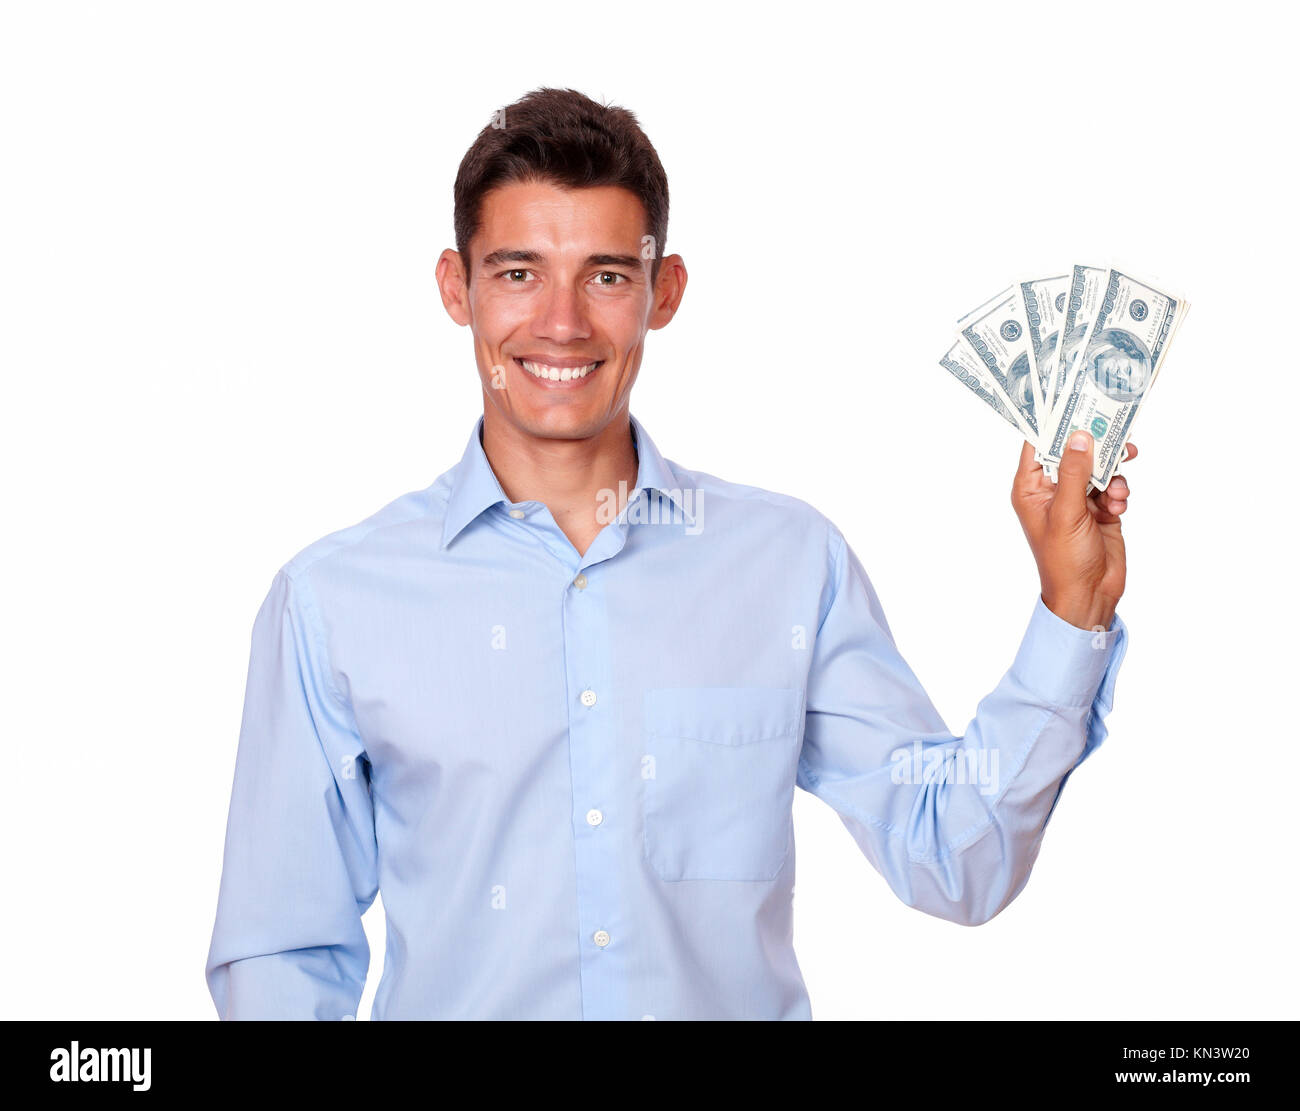 A portrait of an ambitious man on blue shirt smiling and holding cash dollars while looking at you on isolated background. Stock Photo